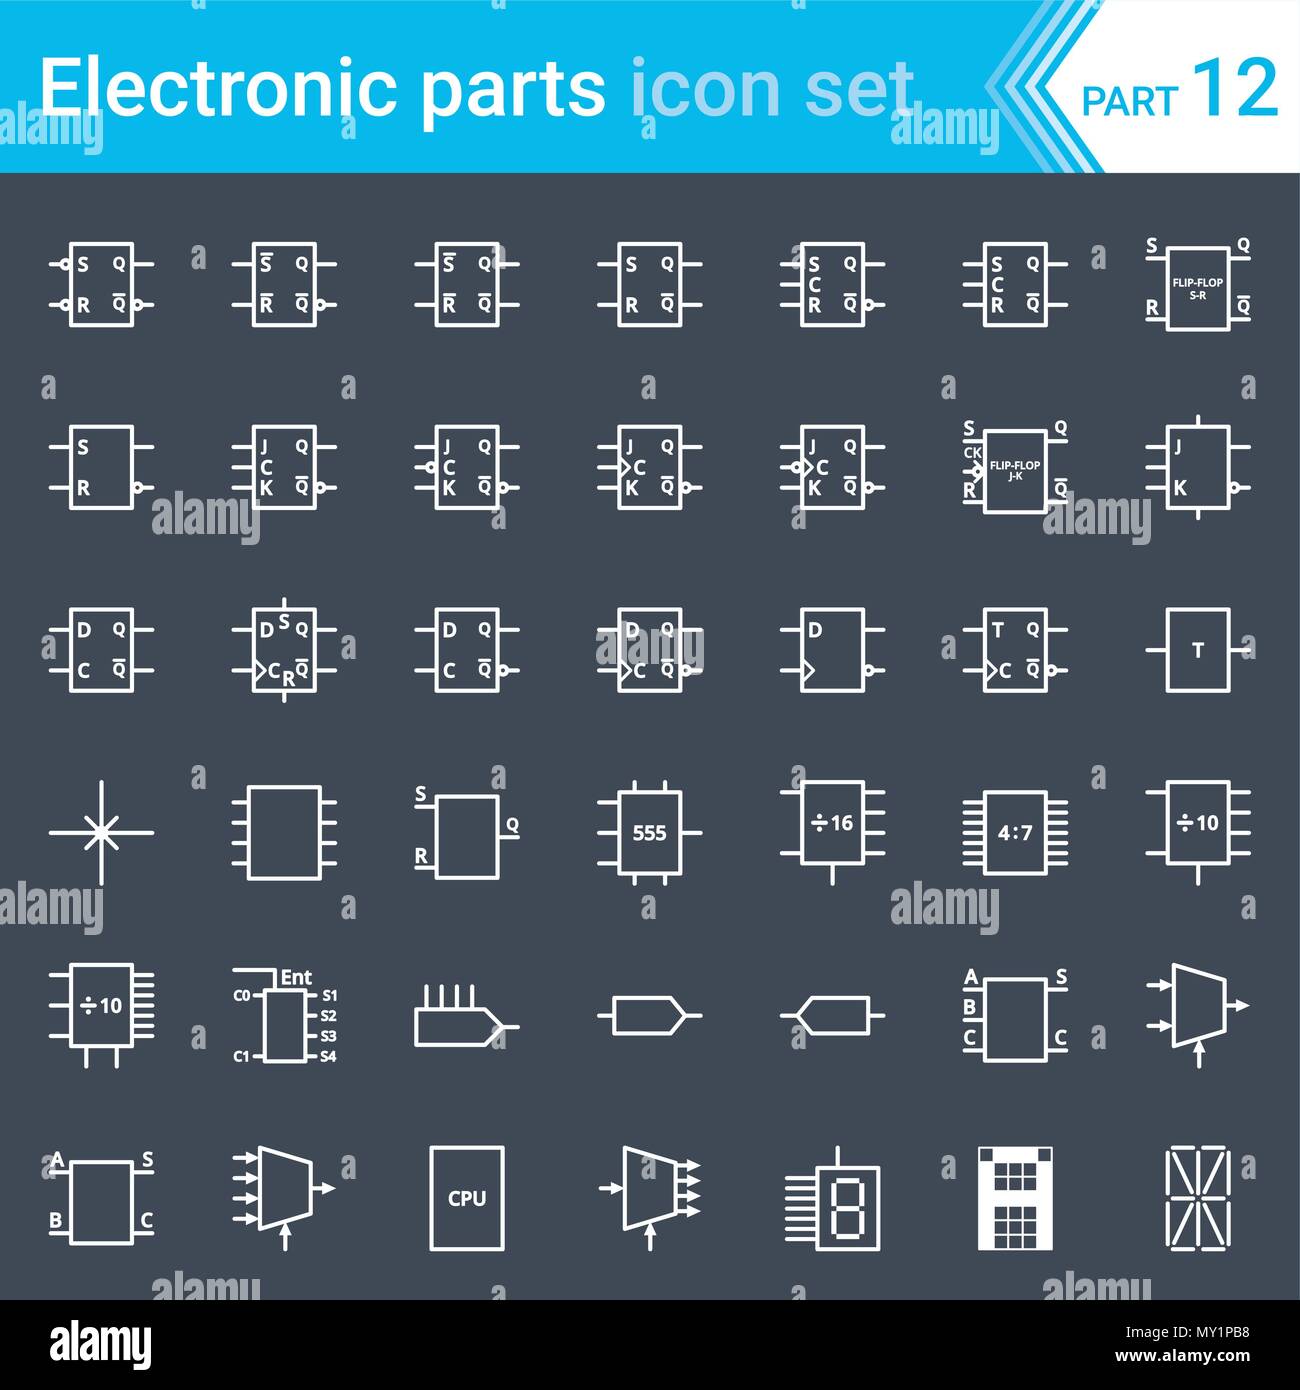 Electric and electronic icons, electric diagram symbols. Digital electronics, flip-flop, logic circuit, display, programming conventions. Stock Vector